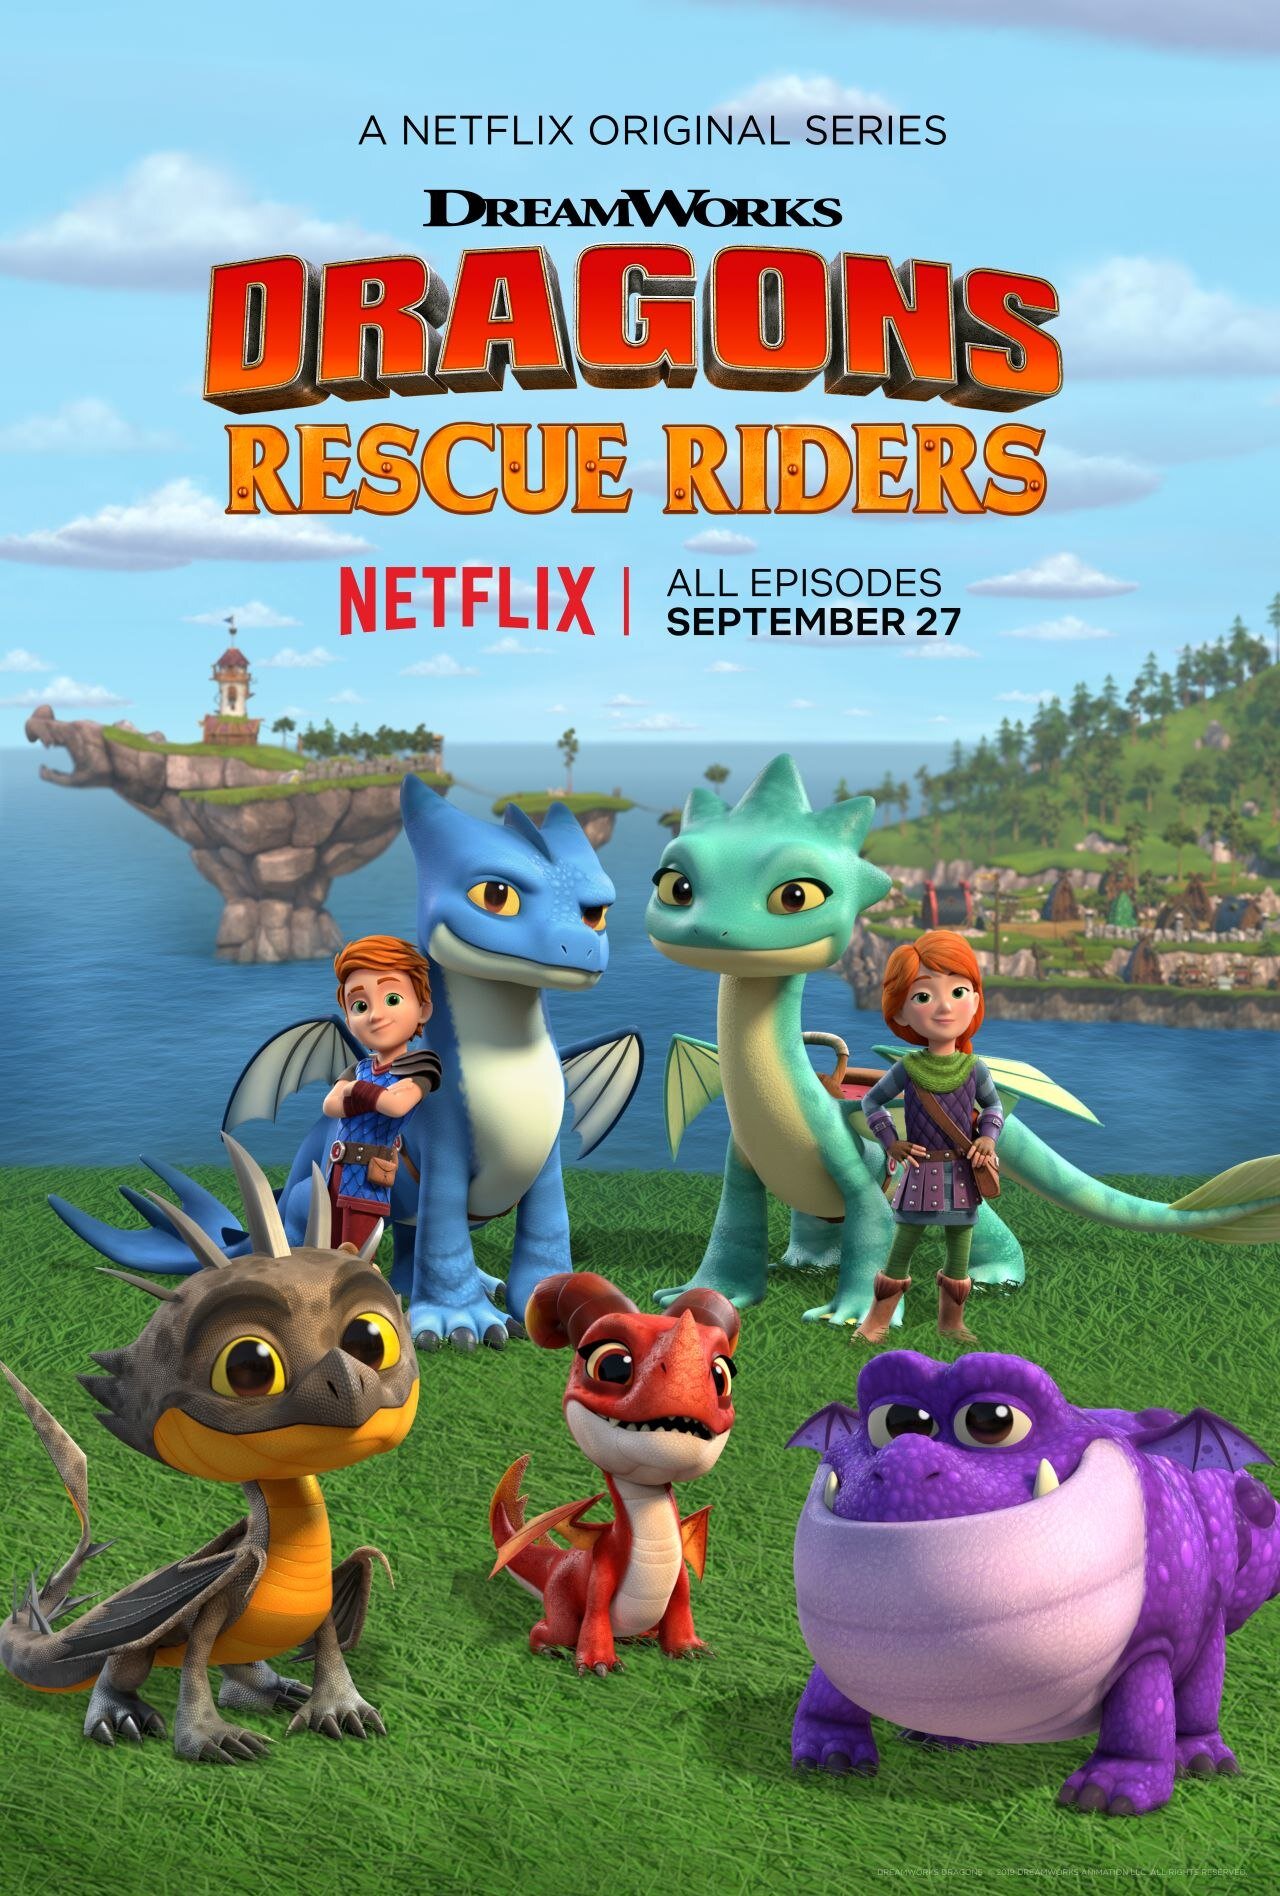 Dragons Rescure Riders Poster.jpg